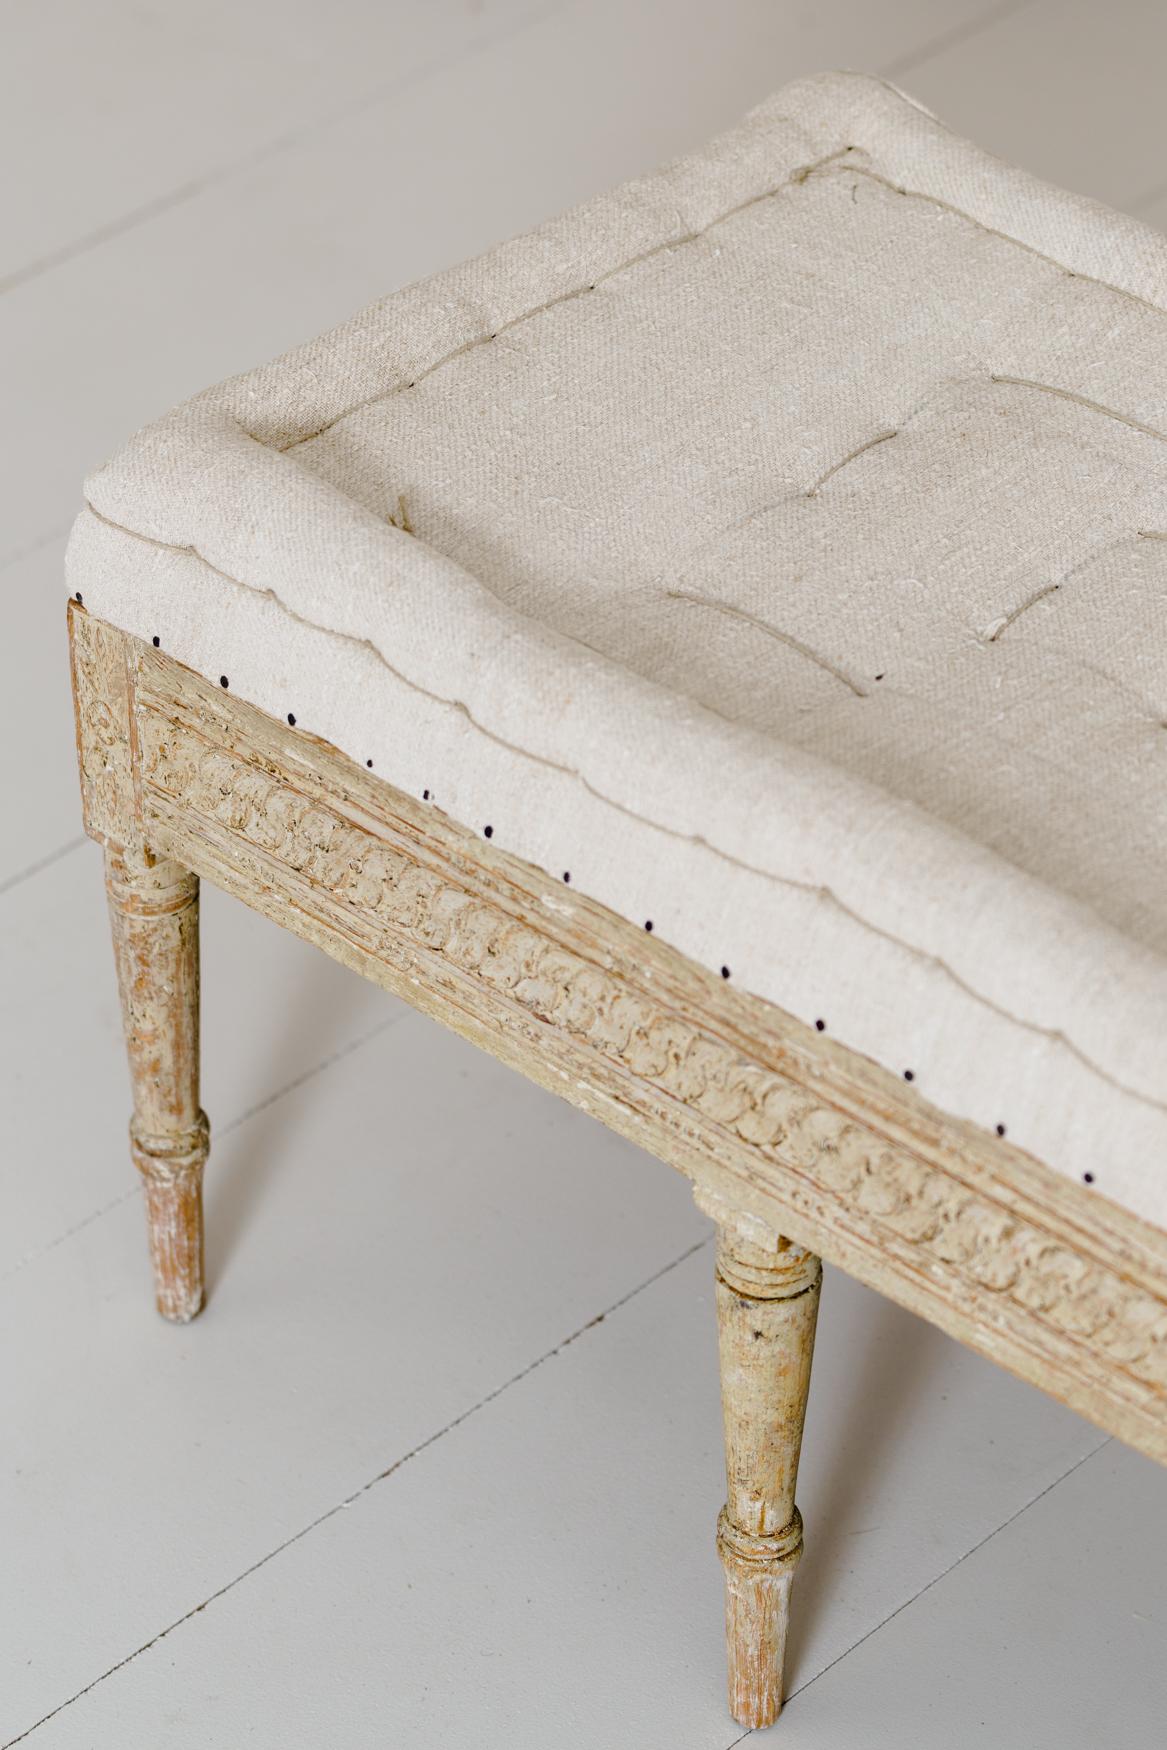 18th Century and Earlier 18th Century Swedish Gustavian Period Bench or Footstool in Original Paint